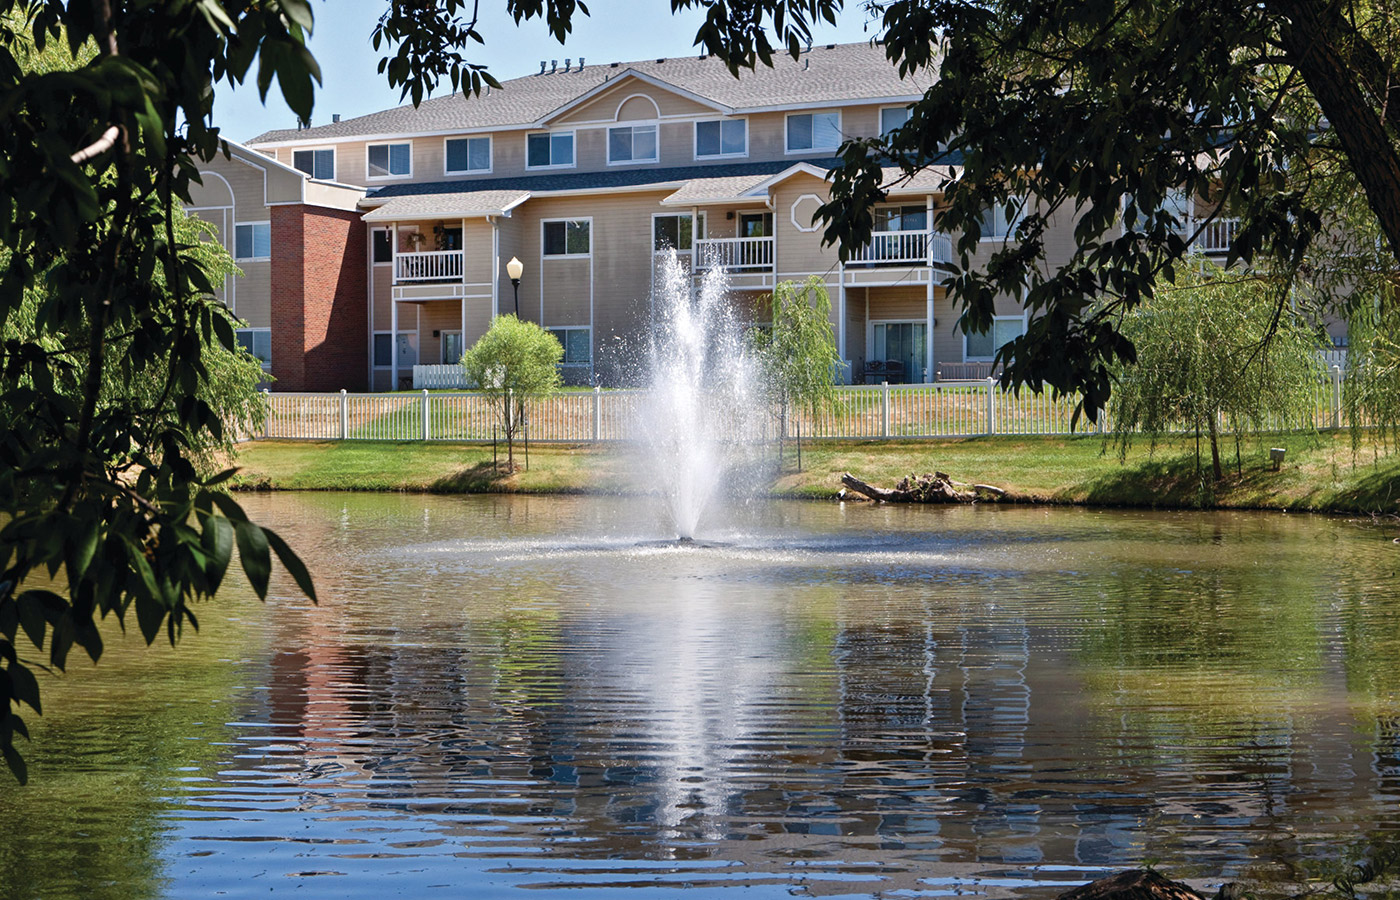 The Fountains at Greenbriar.